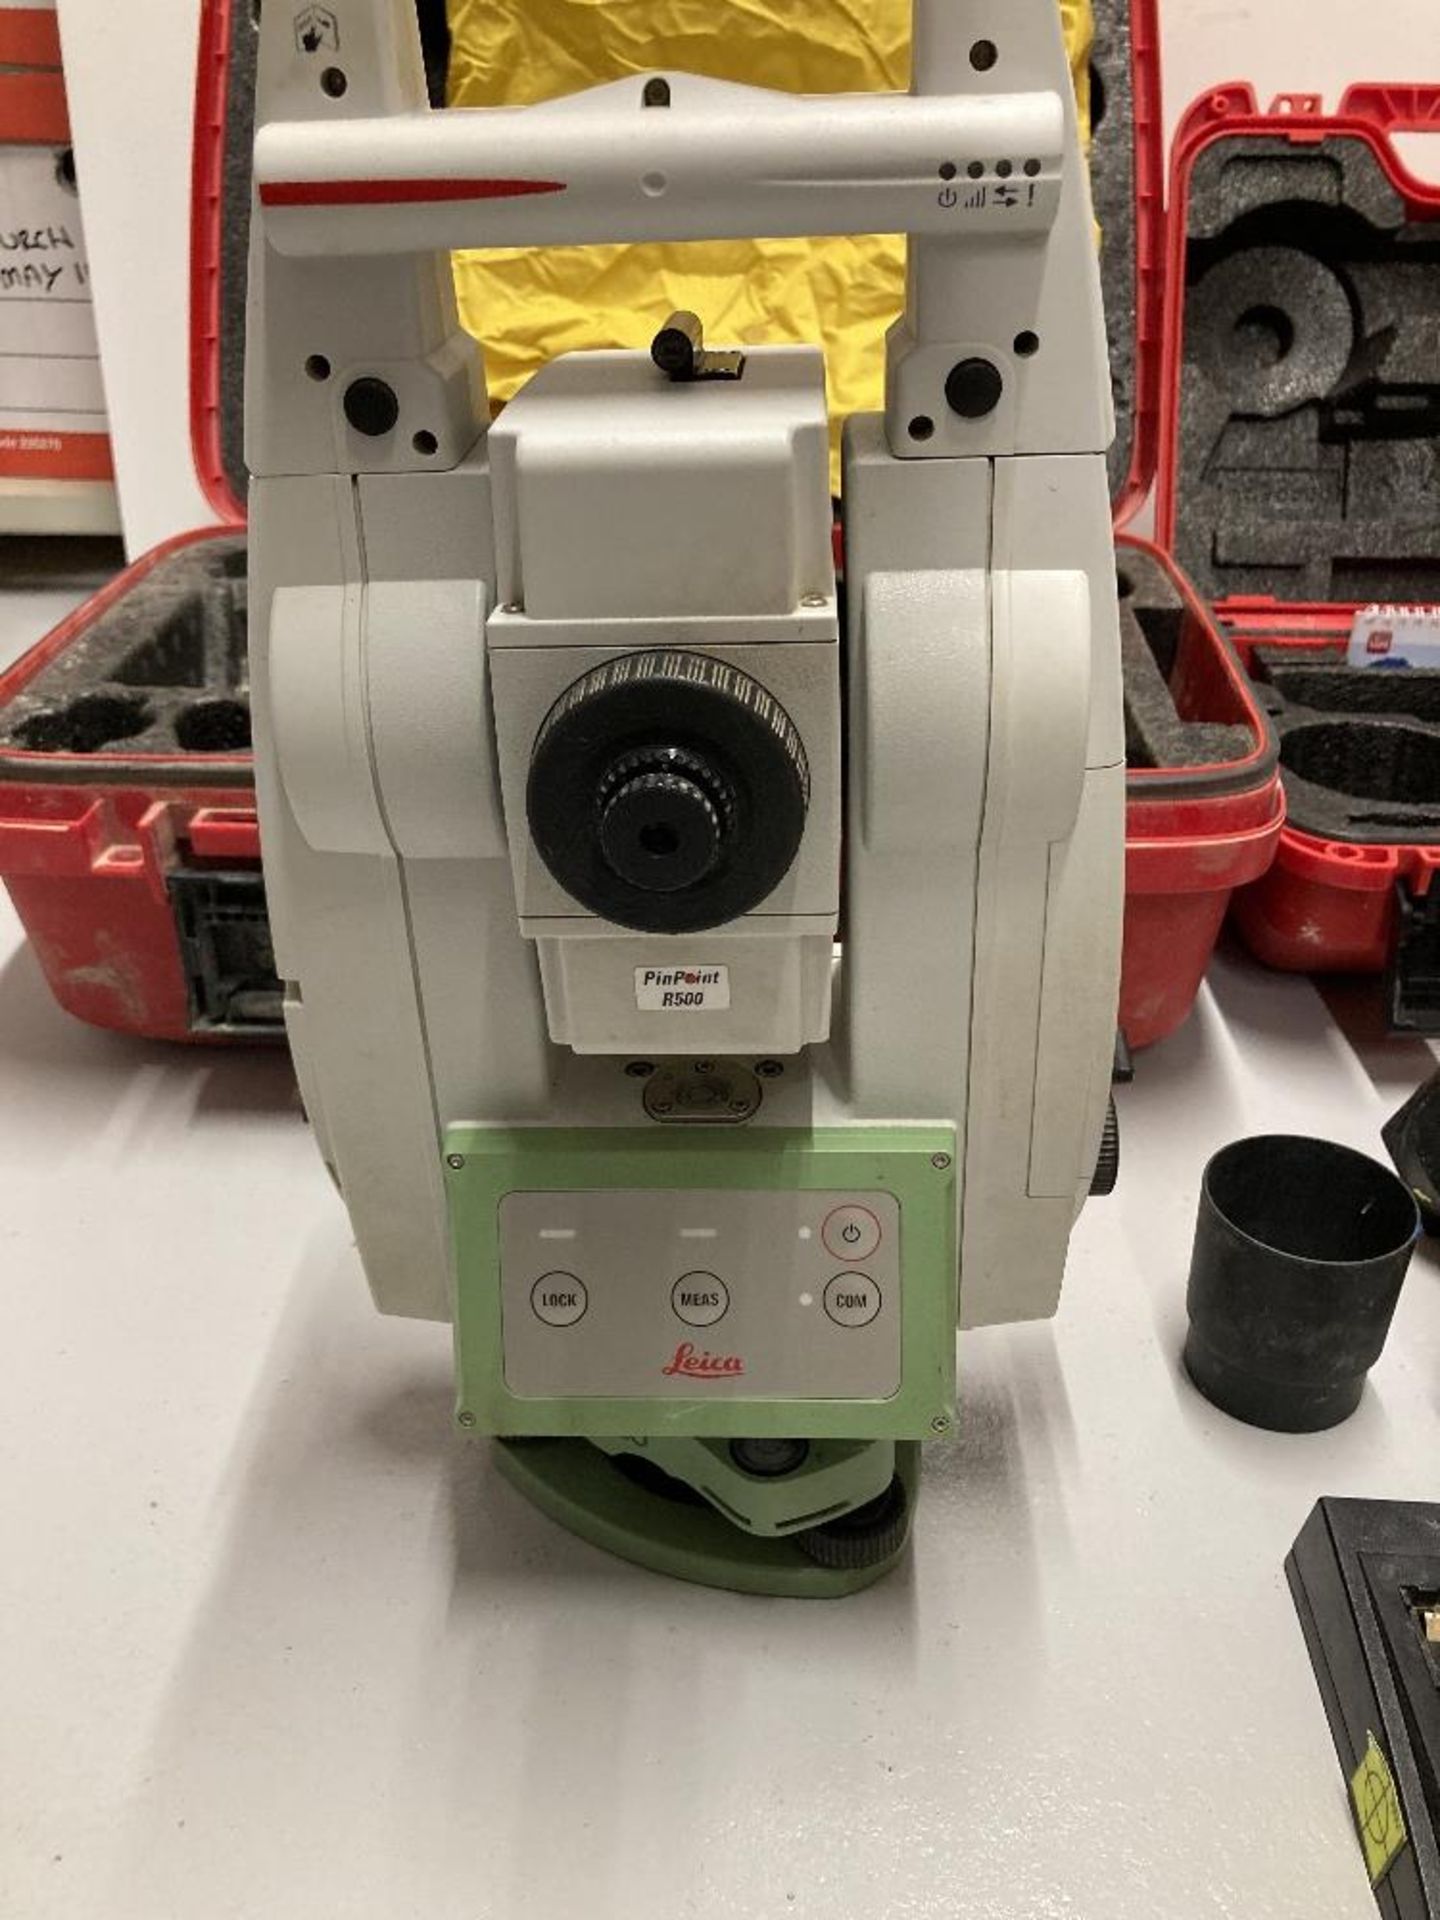 Leica TS13 Robotic Total Station Kit c/w CS20 Field Controller Kit - Image 5 of 23